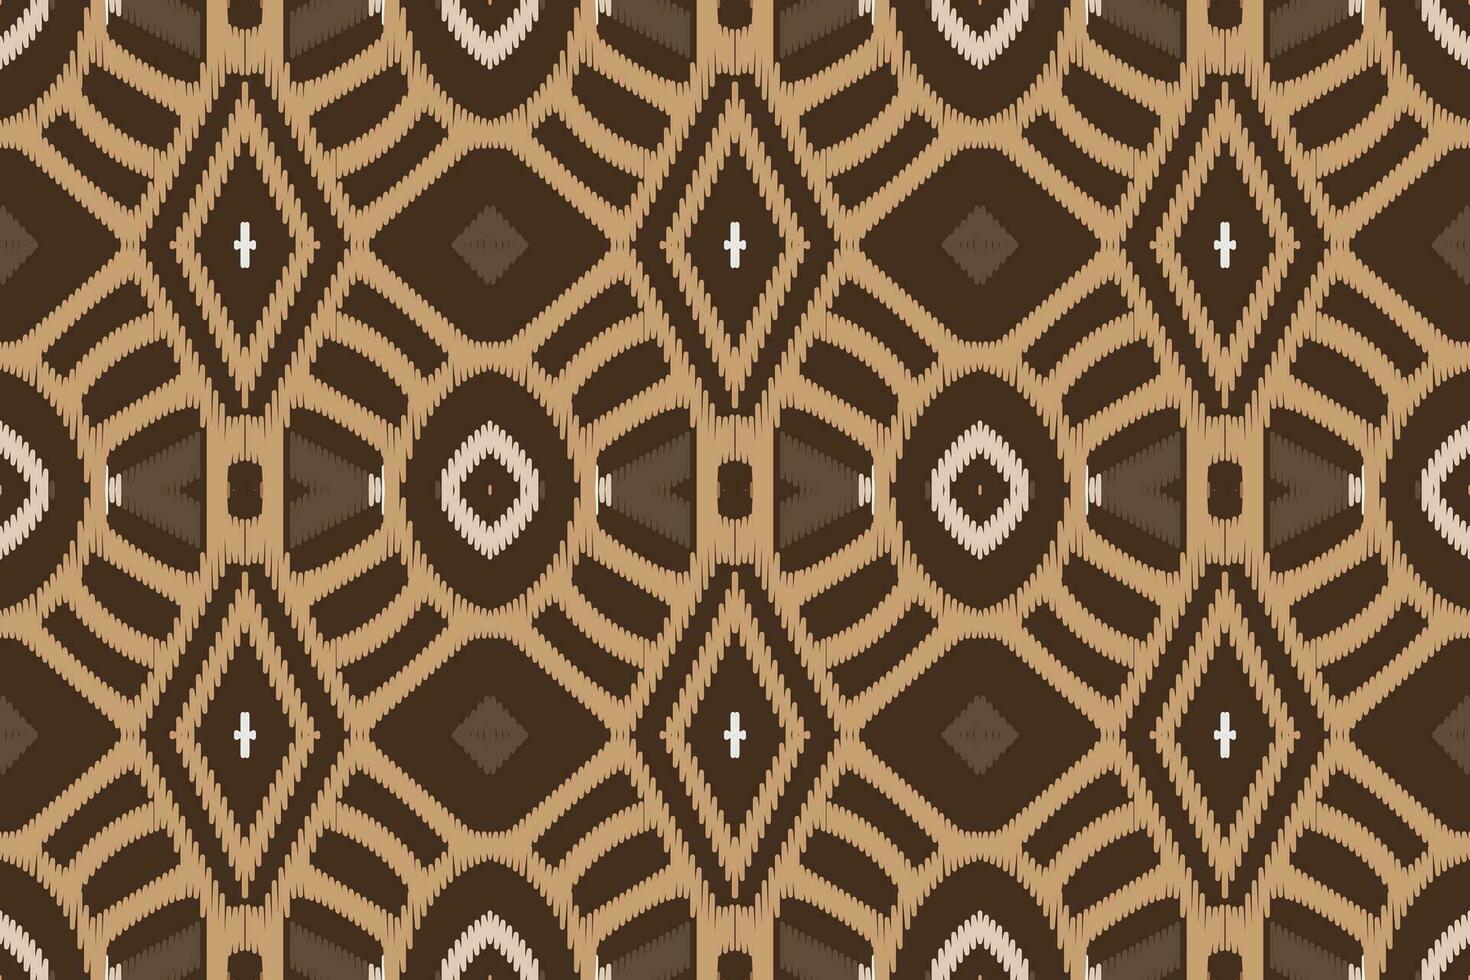 Ikat Fabric Paisley Embroidery Background. Ikat Aztec Geometric Ethnic Oriental Pattern Traditional. Ikat Aztec Style Abstract Design for Print Texture,fabric,saree,sari,carpet. vector